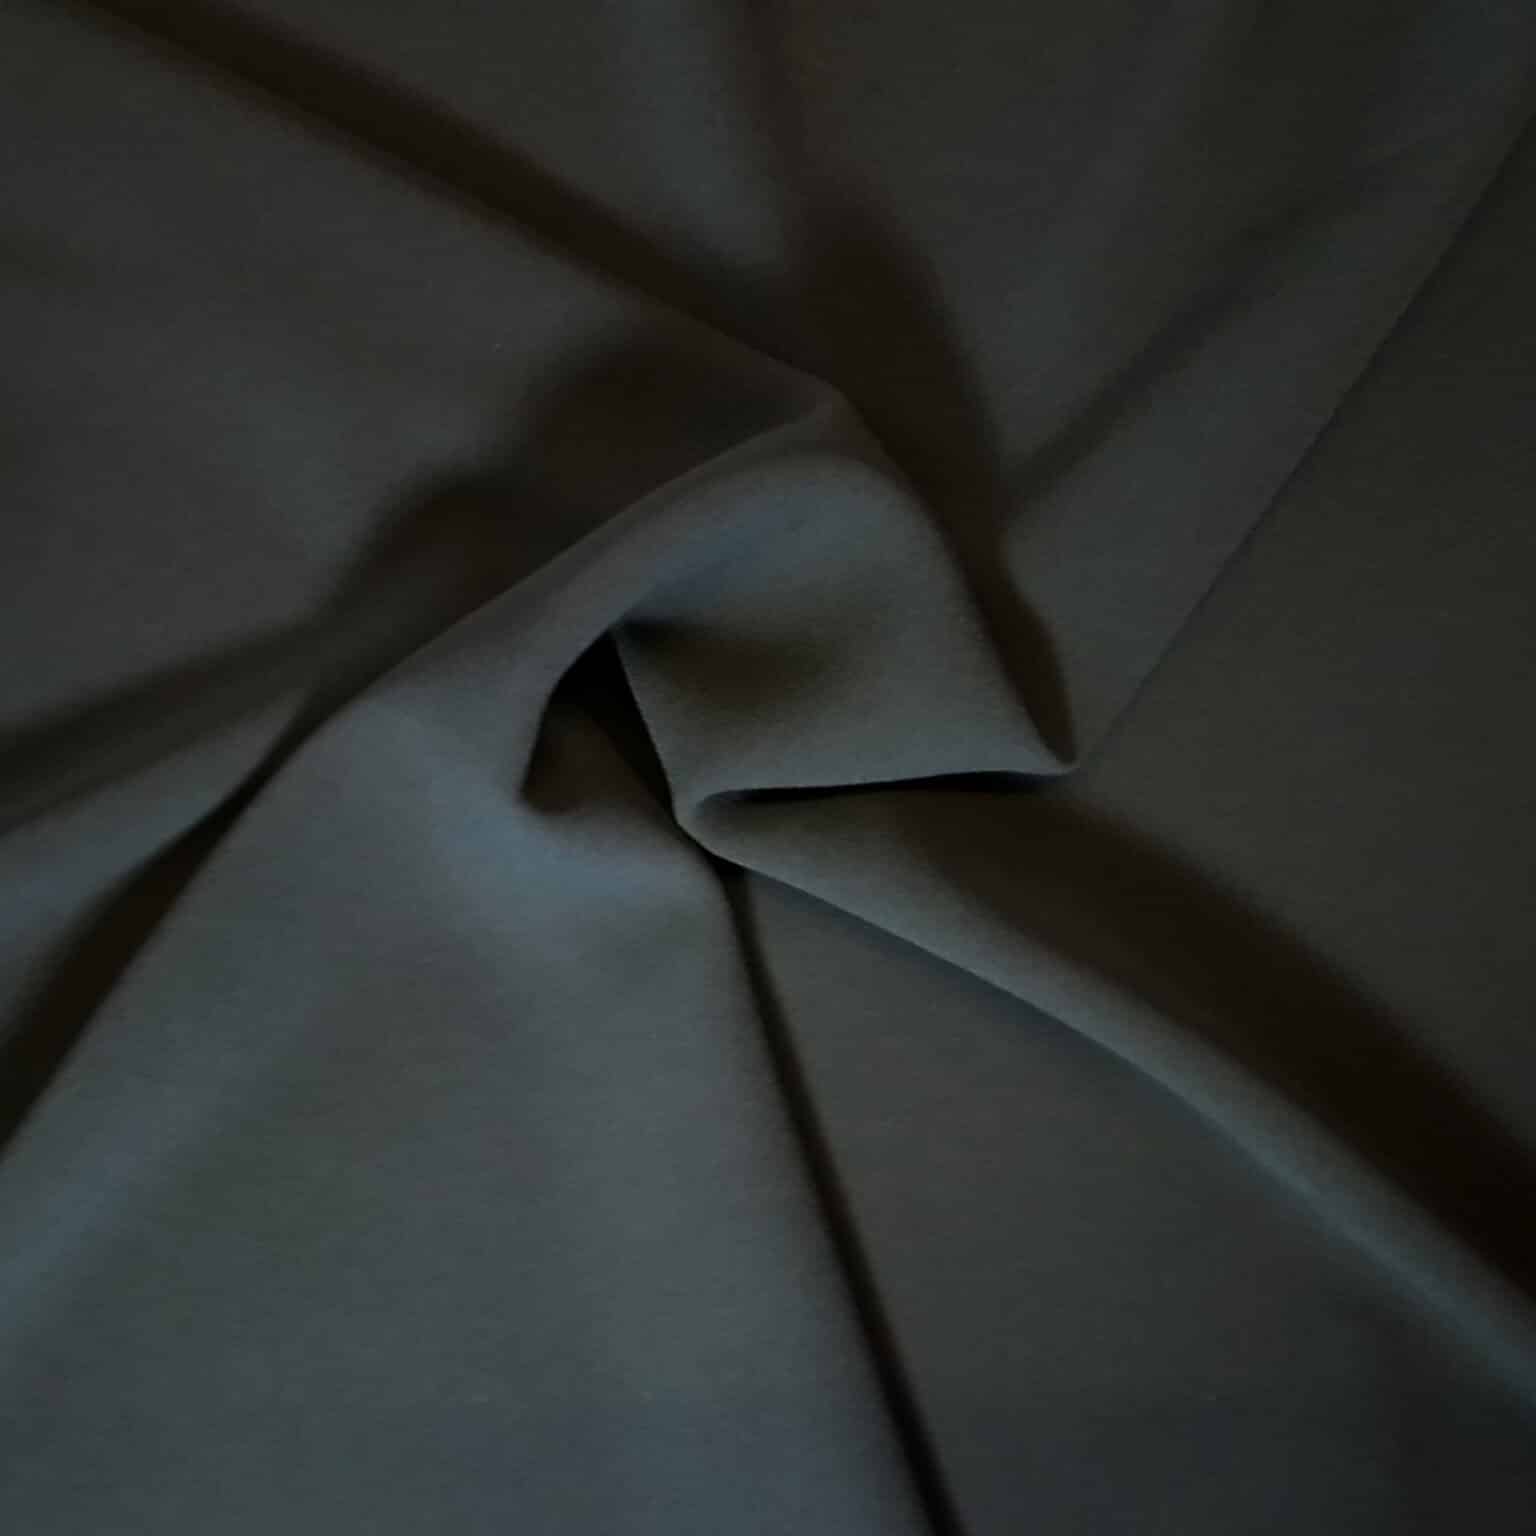 Polyester Triple Crepe Fabric - Black - 150cm Wide